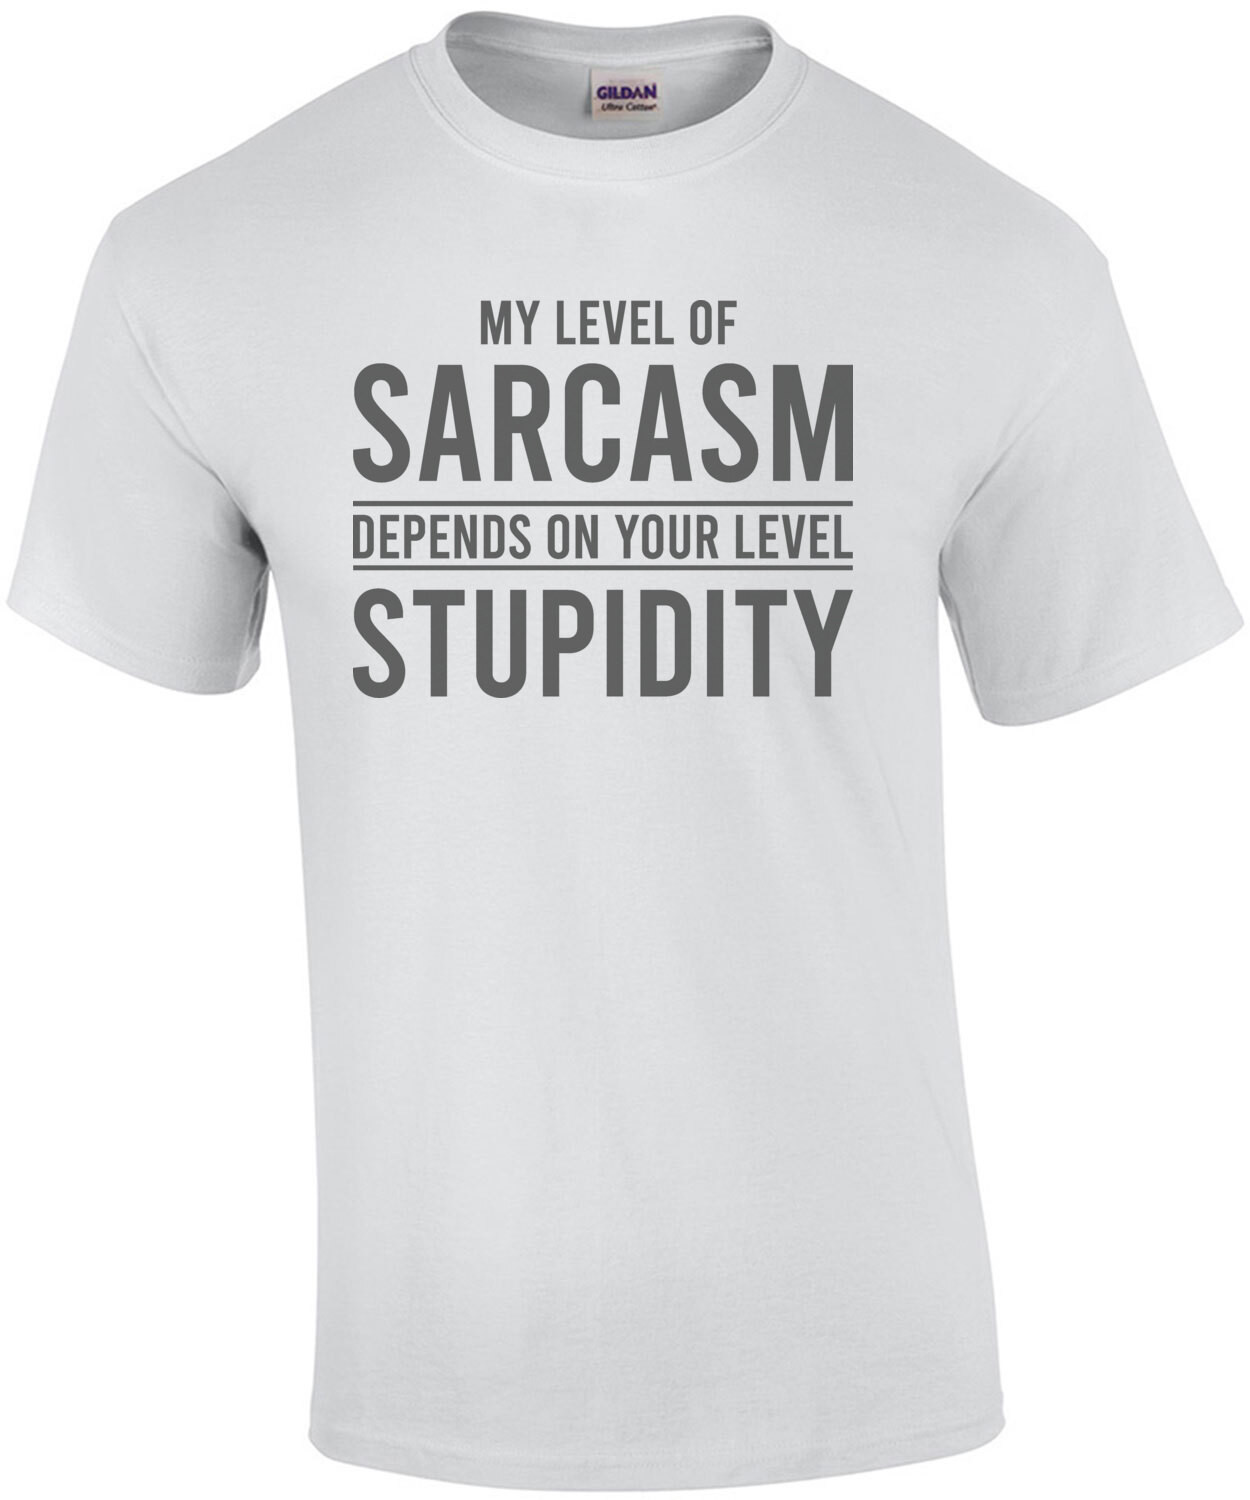 My level of sarcasm depends on your level of stupidity - sarcastic t-shirt